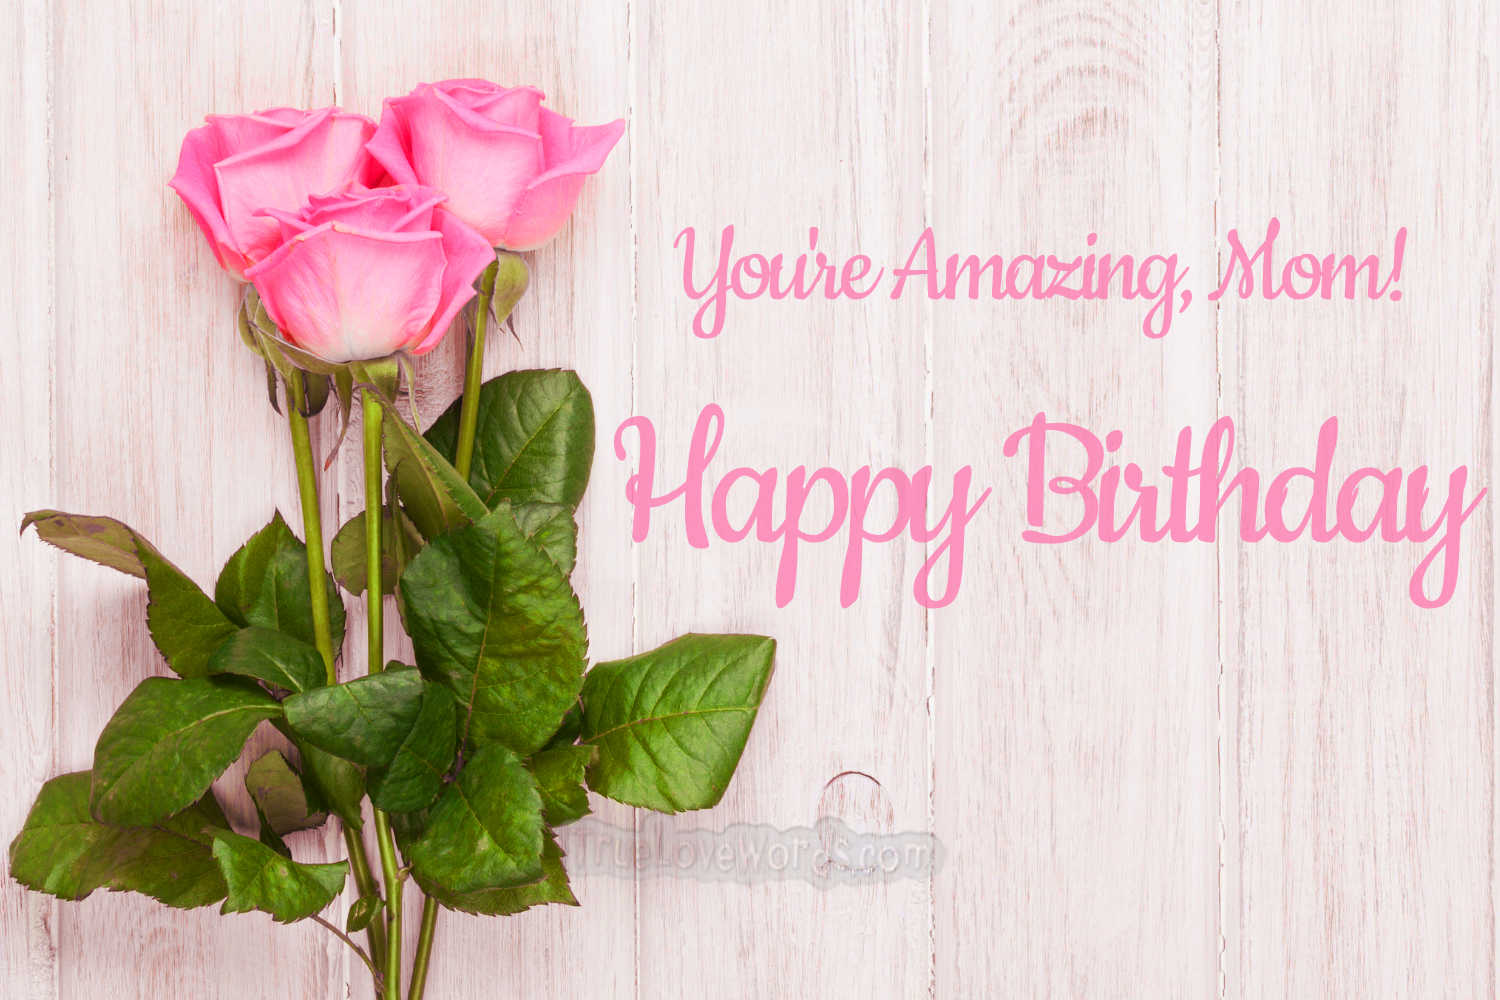 Pink roses and a happy birthday message